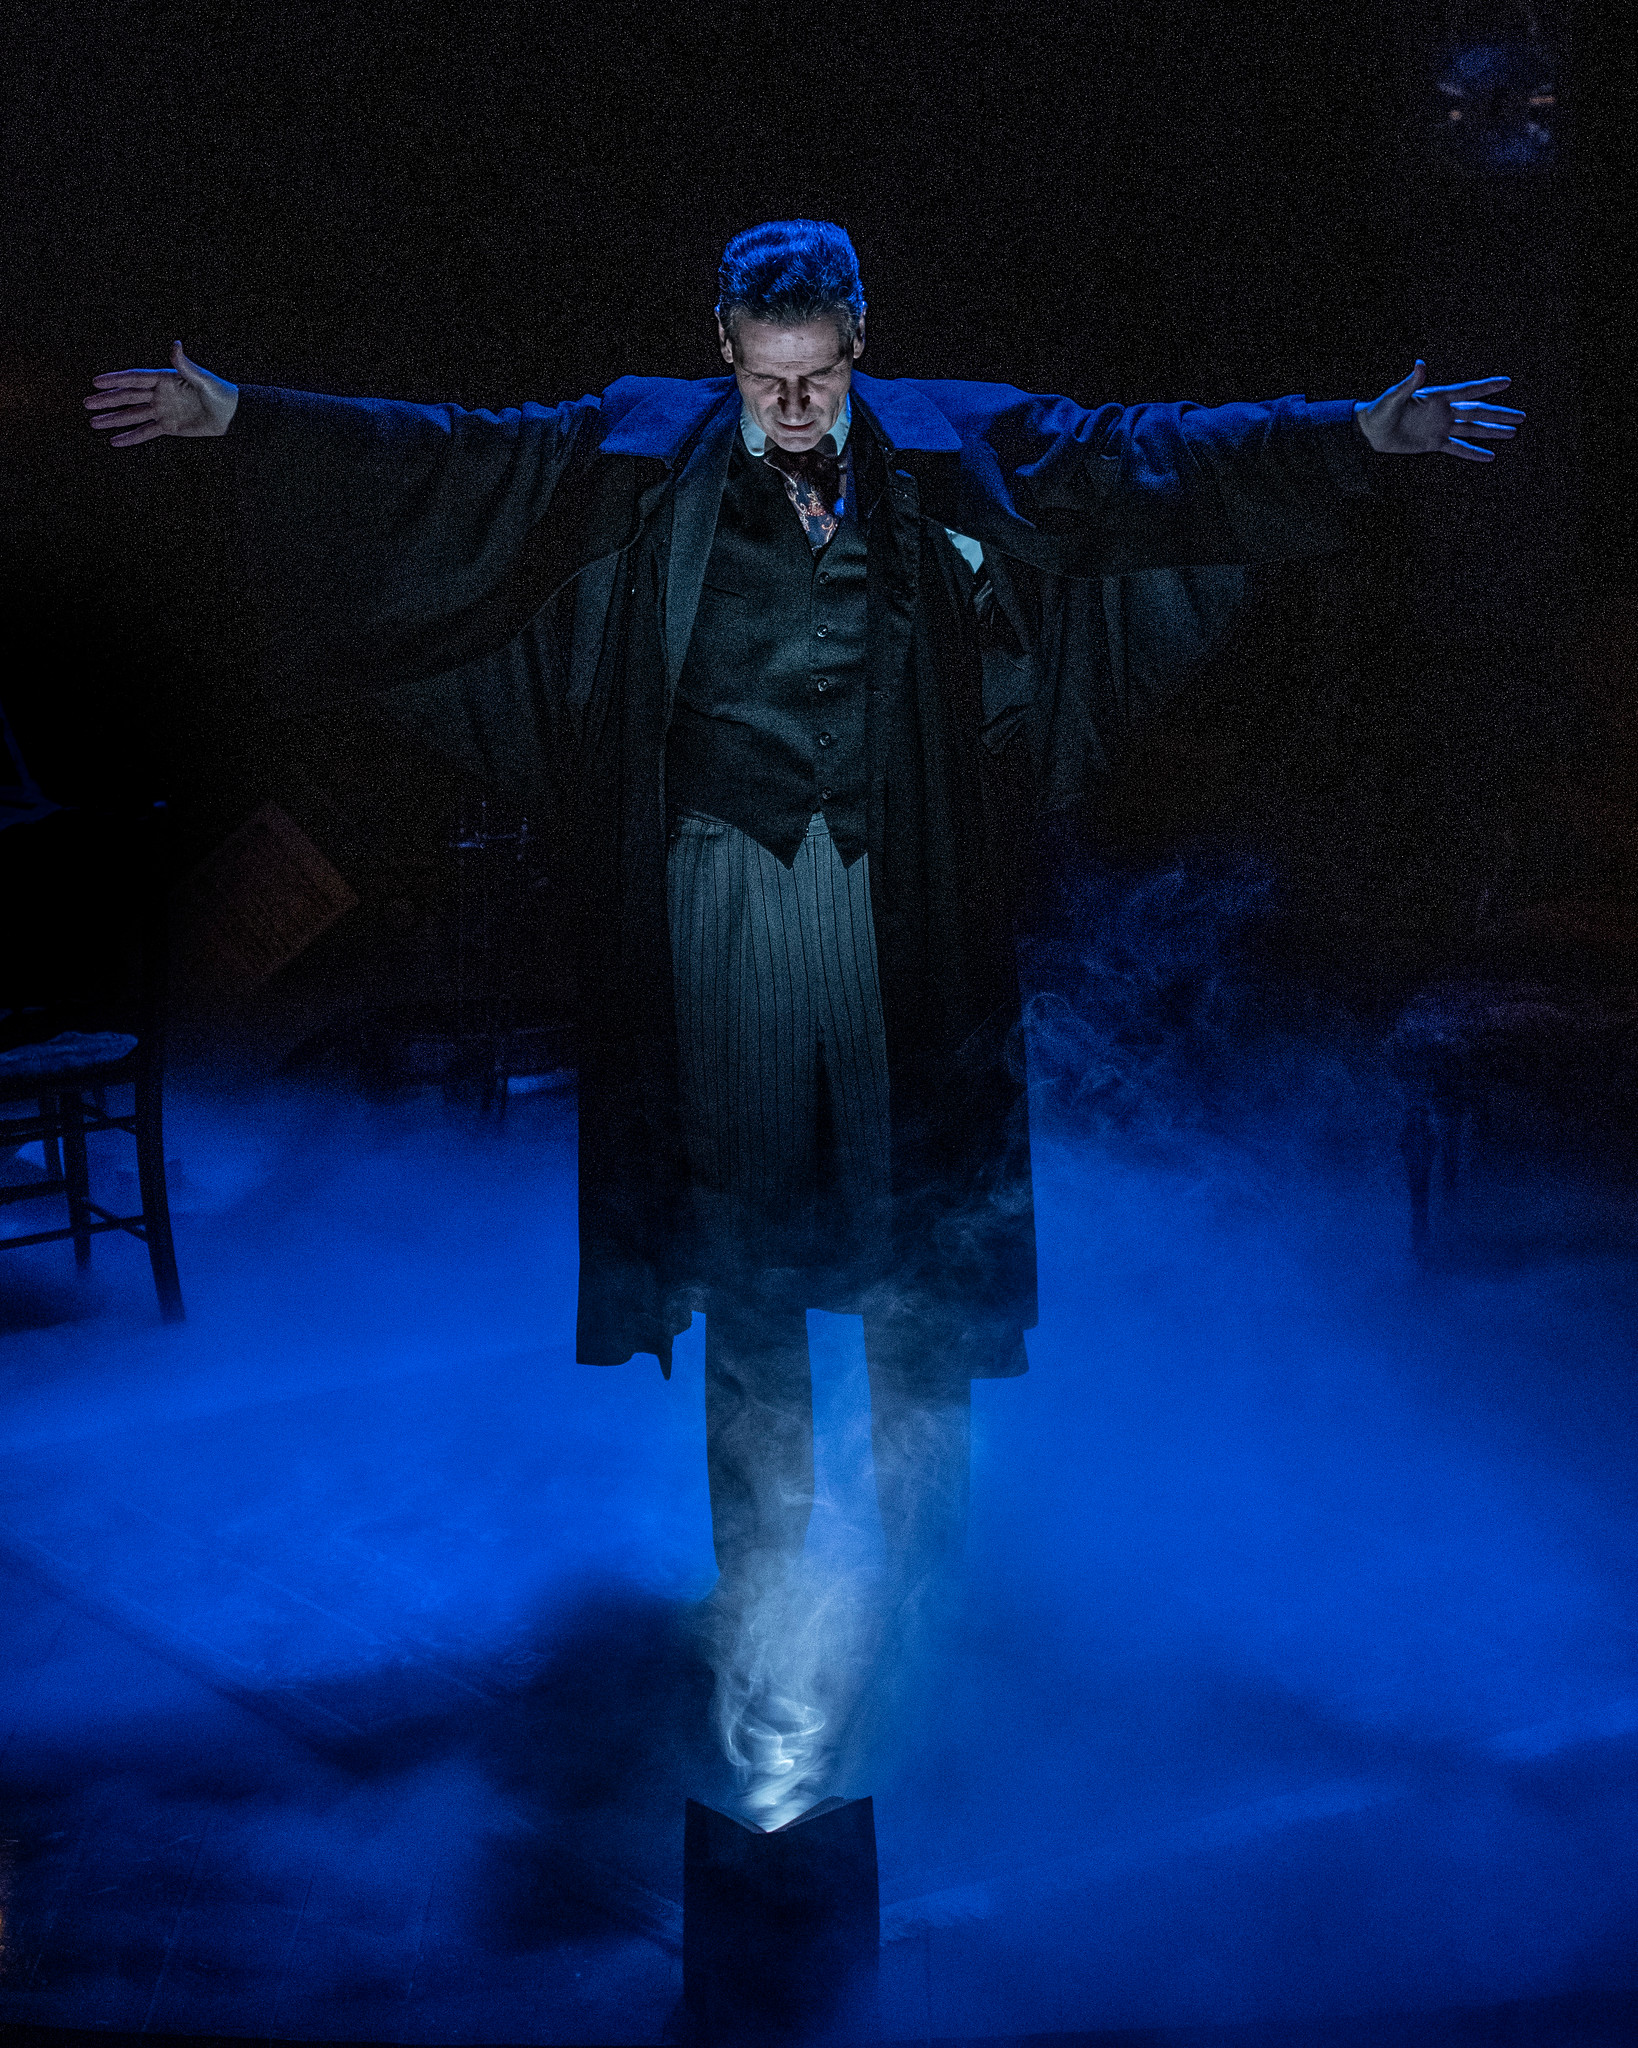 Ghosts visit Paul Morella’s Ebenezer Scrooge in “A Christmas Carol” at Olney Theatre Center.